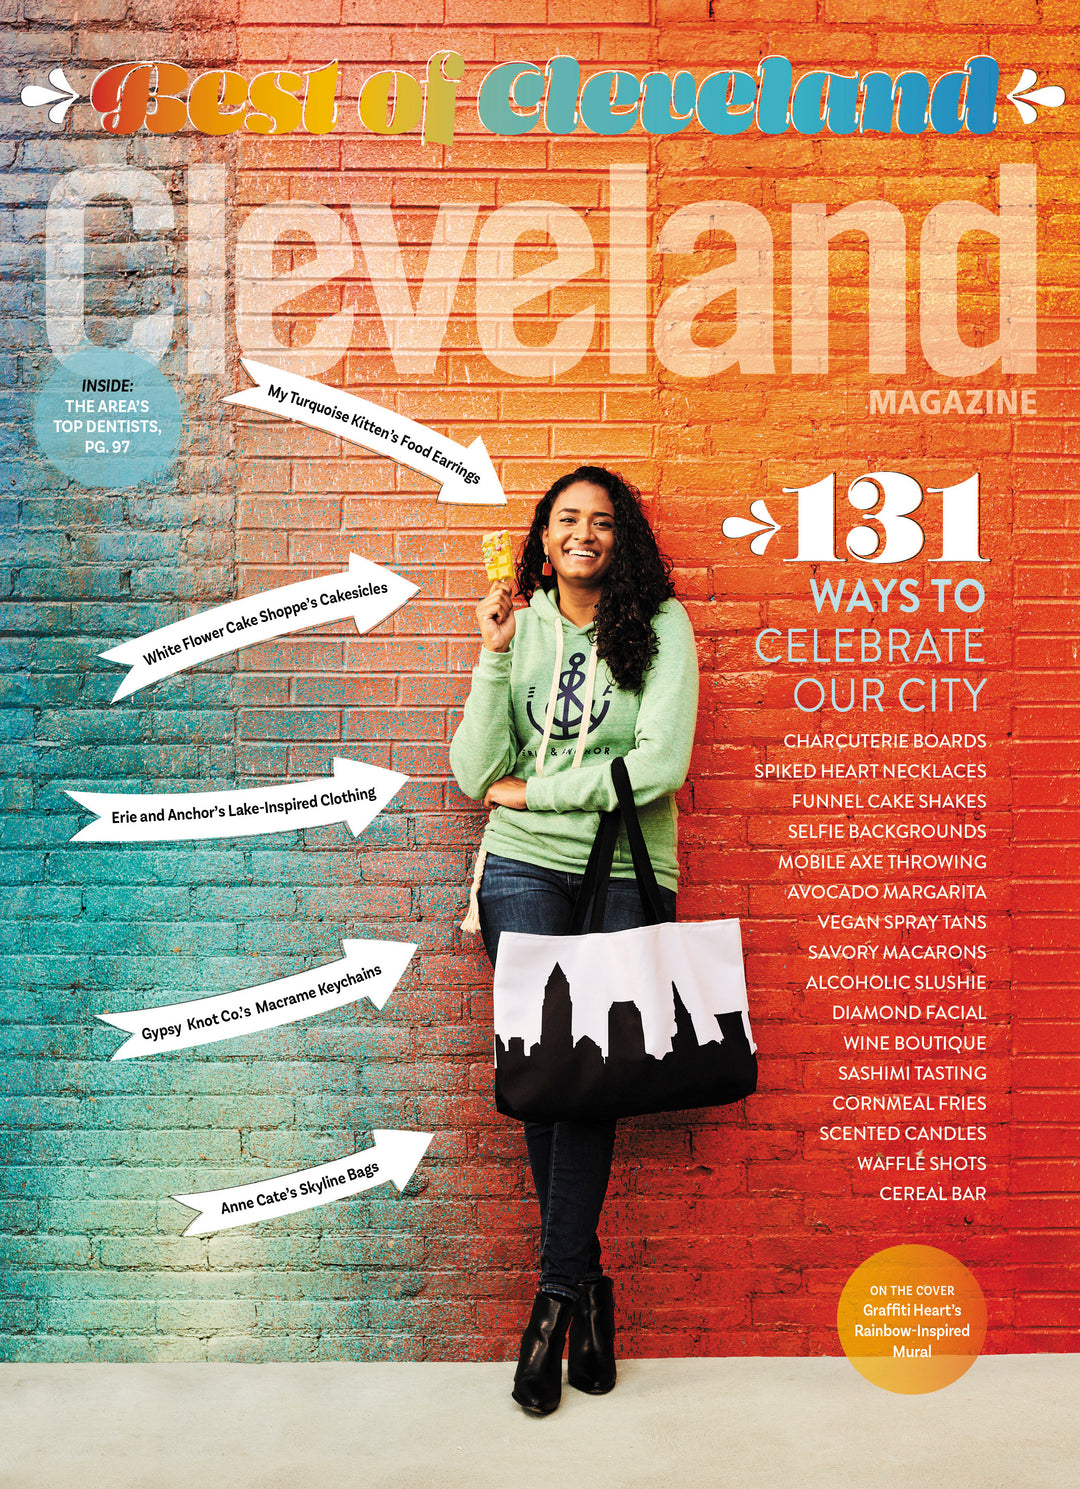 Cleveland Magazine's BEST OF CLEVELAND: Anne Cate's Skyline Bags - Cleveland Magazine